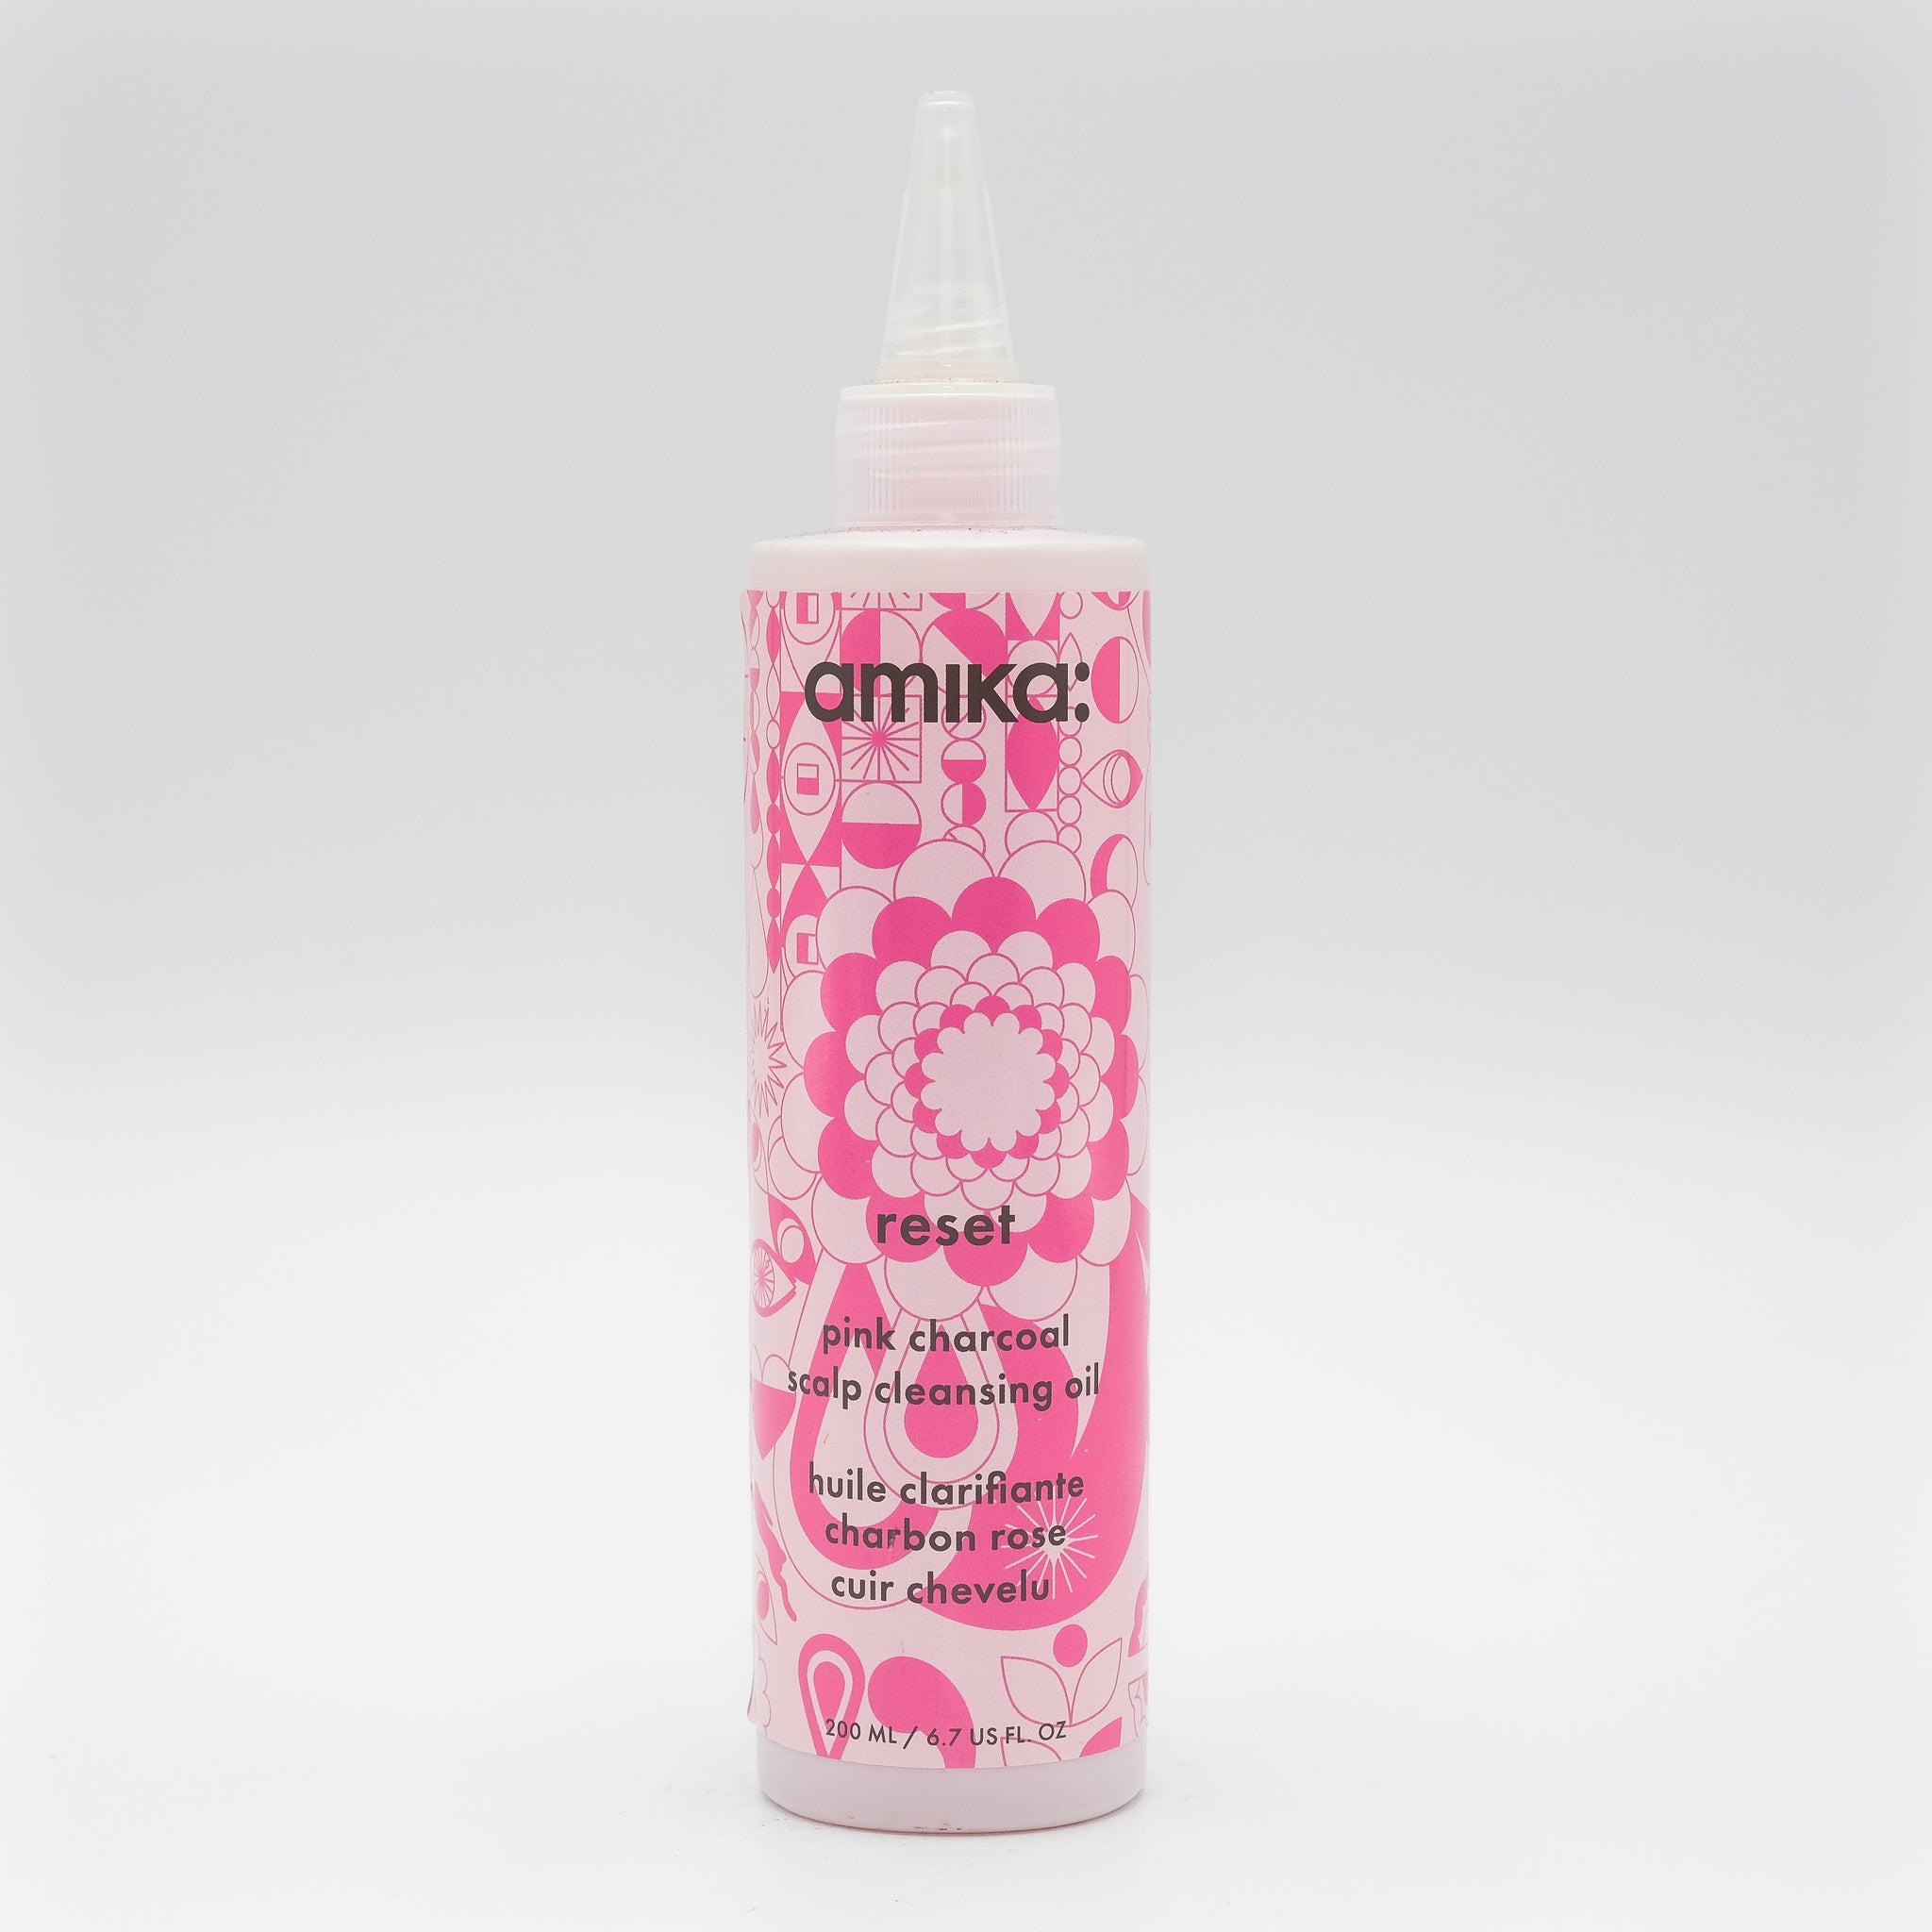 AMIKA Reset Pink Charcoal Scalp Cleansing Oil 6.7 oz